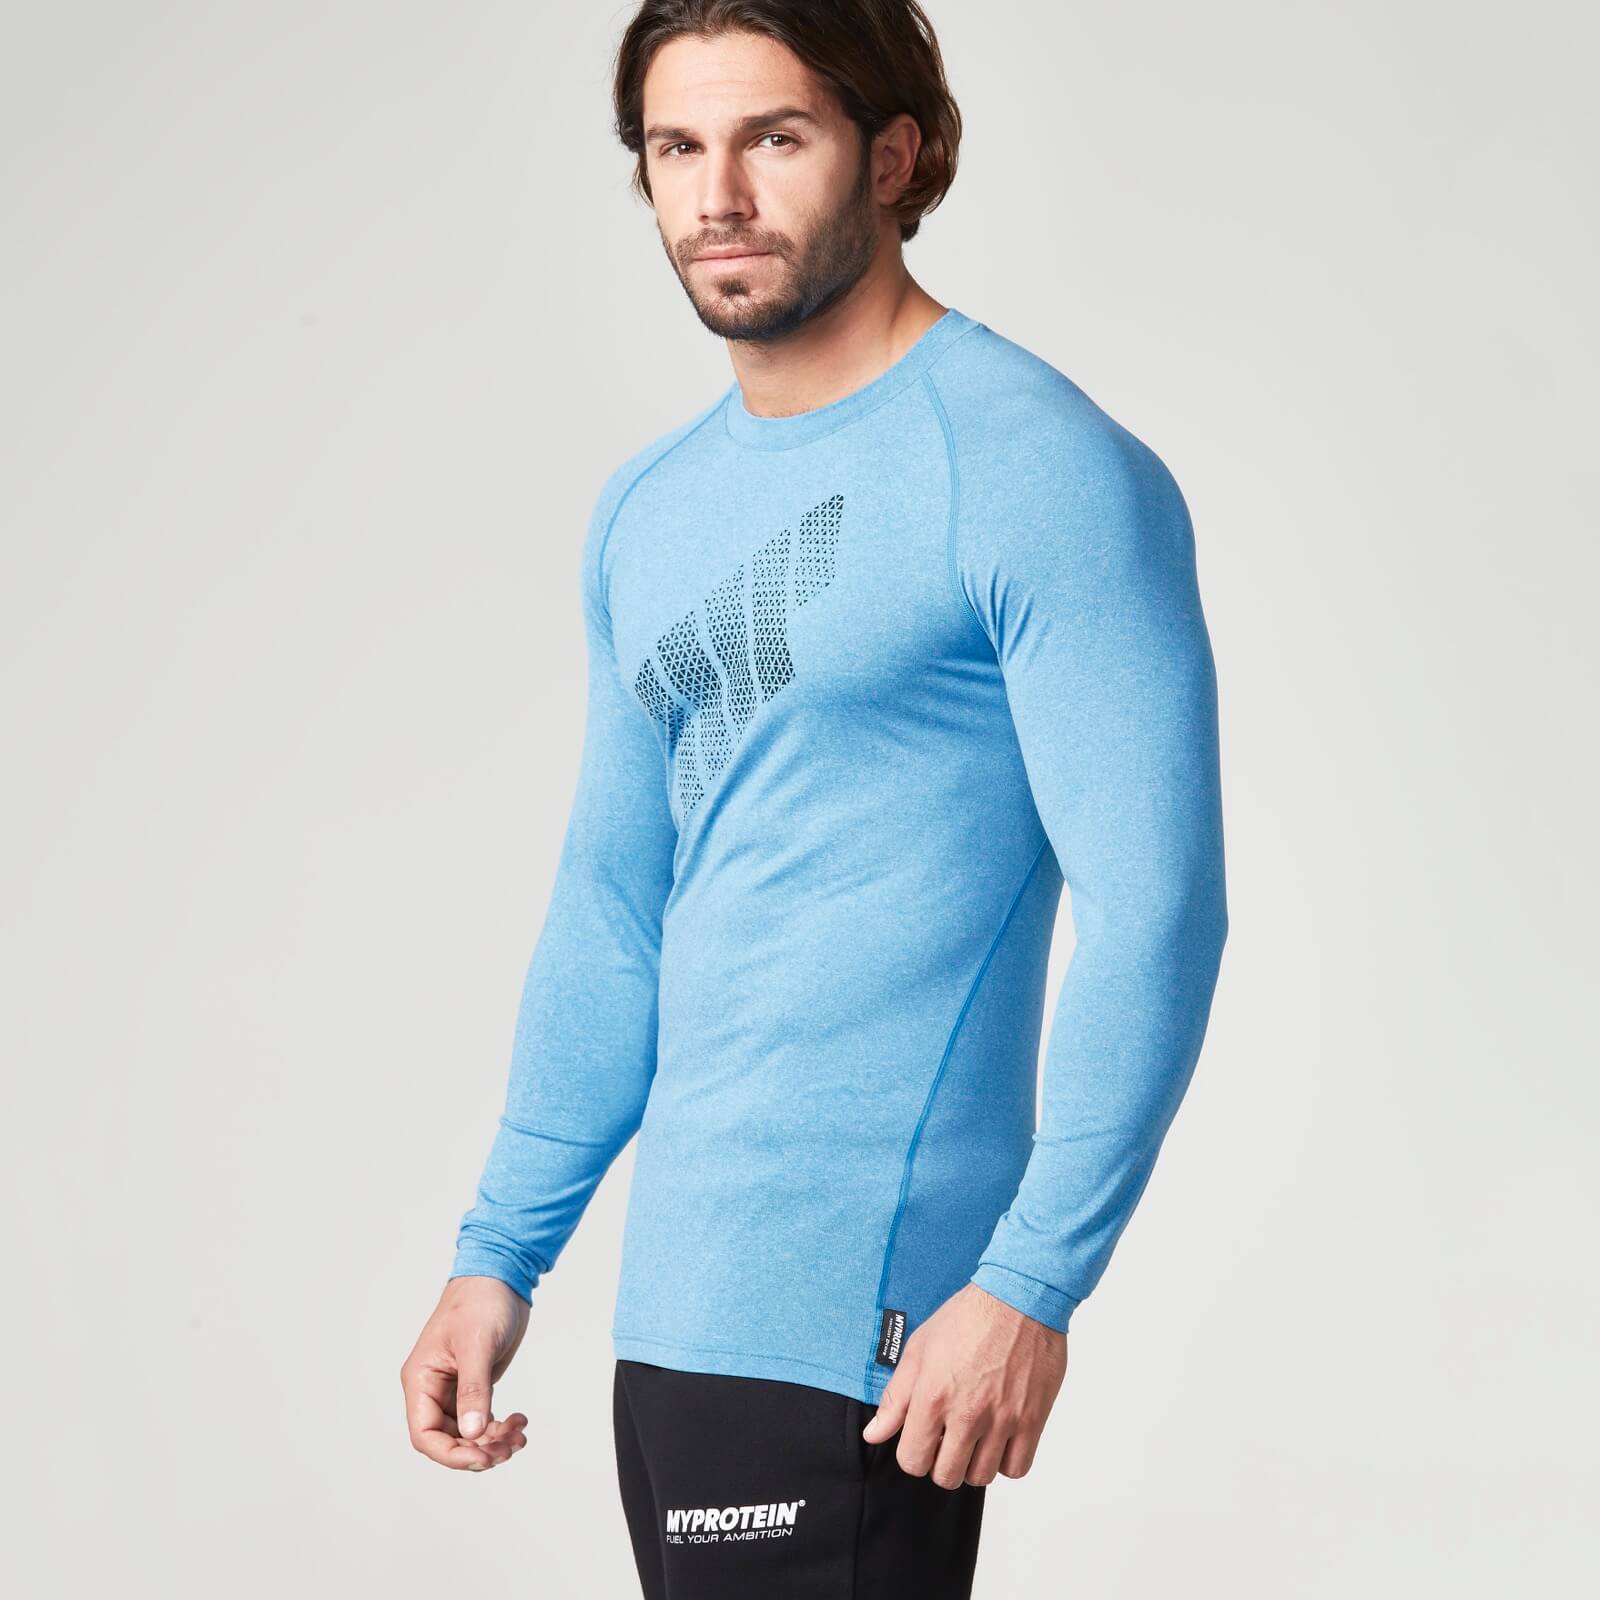 Myprotein Men's Mobility Long Sleeve Top - Blue